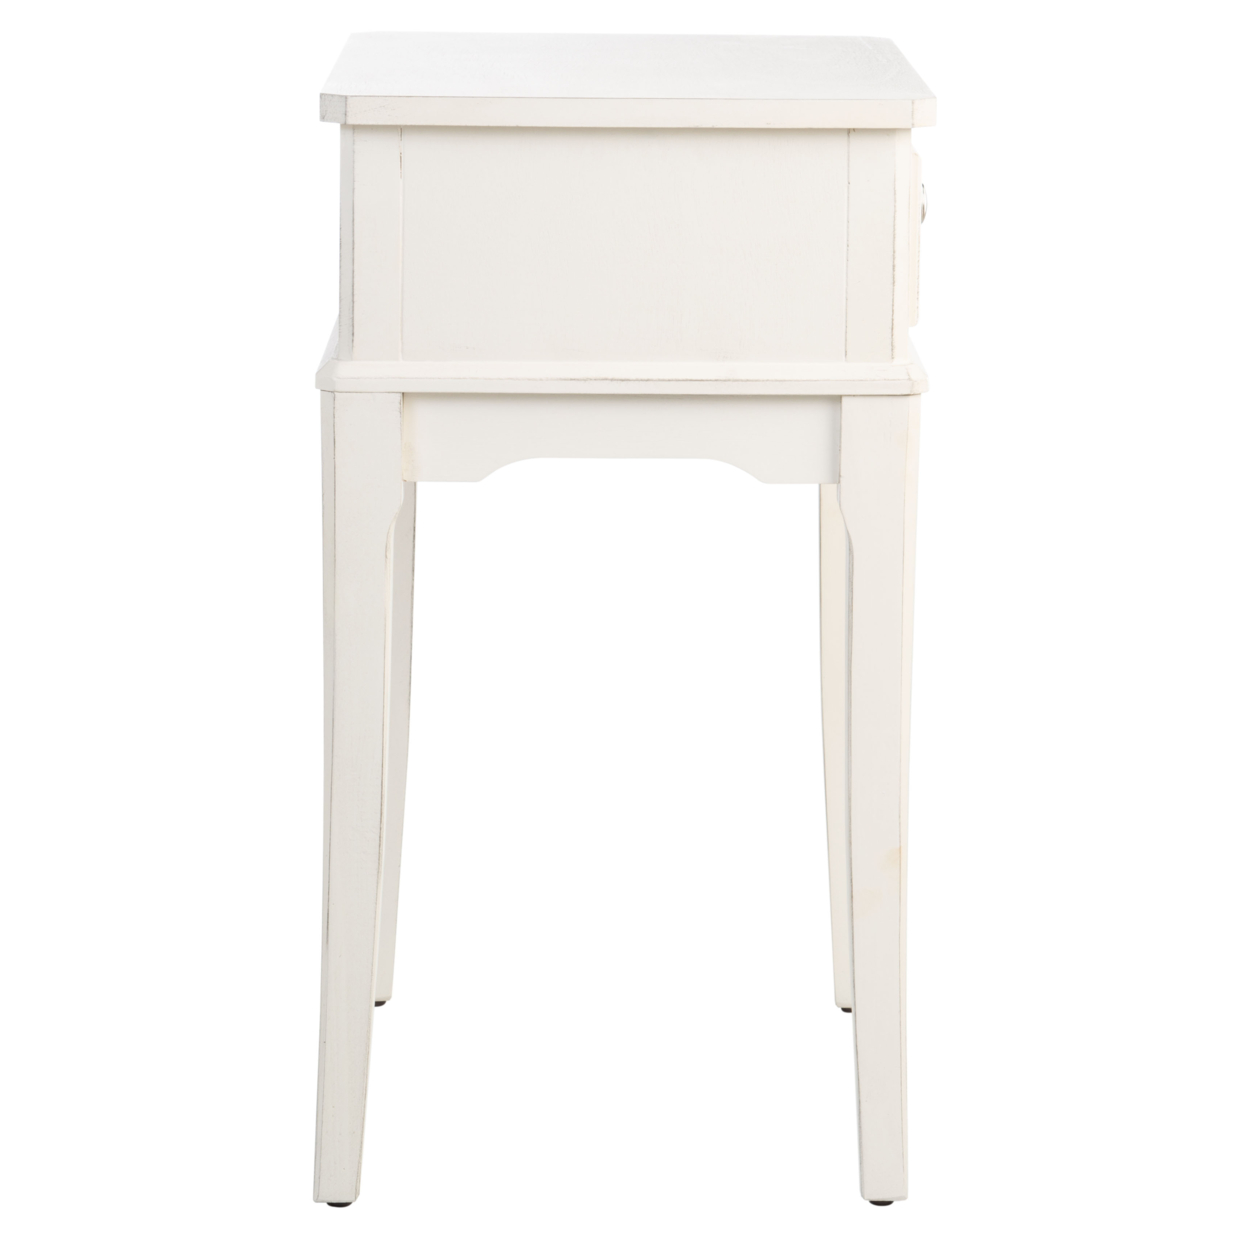 SAFAVIEH Opal 1-Drawer Accent Table Distressed / White